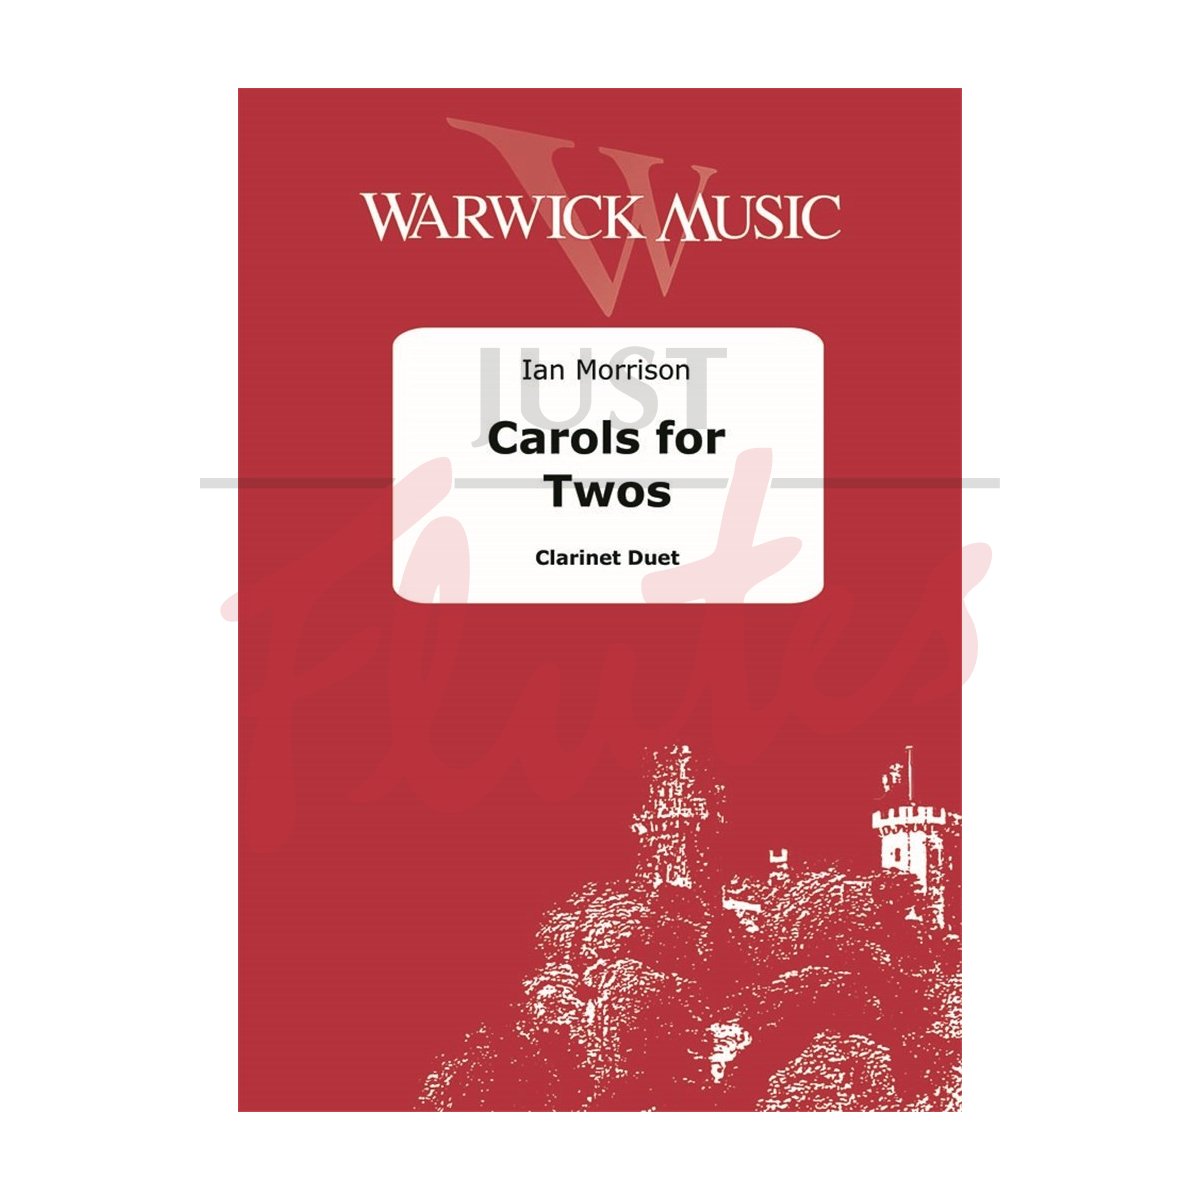 Carols for Twos for Clarinet Duet